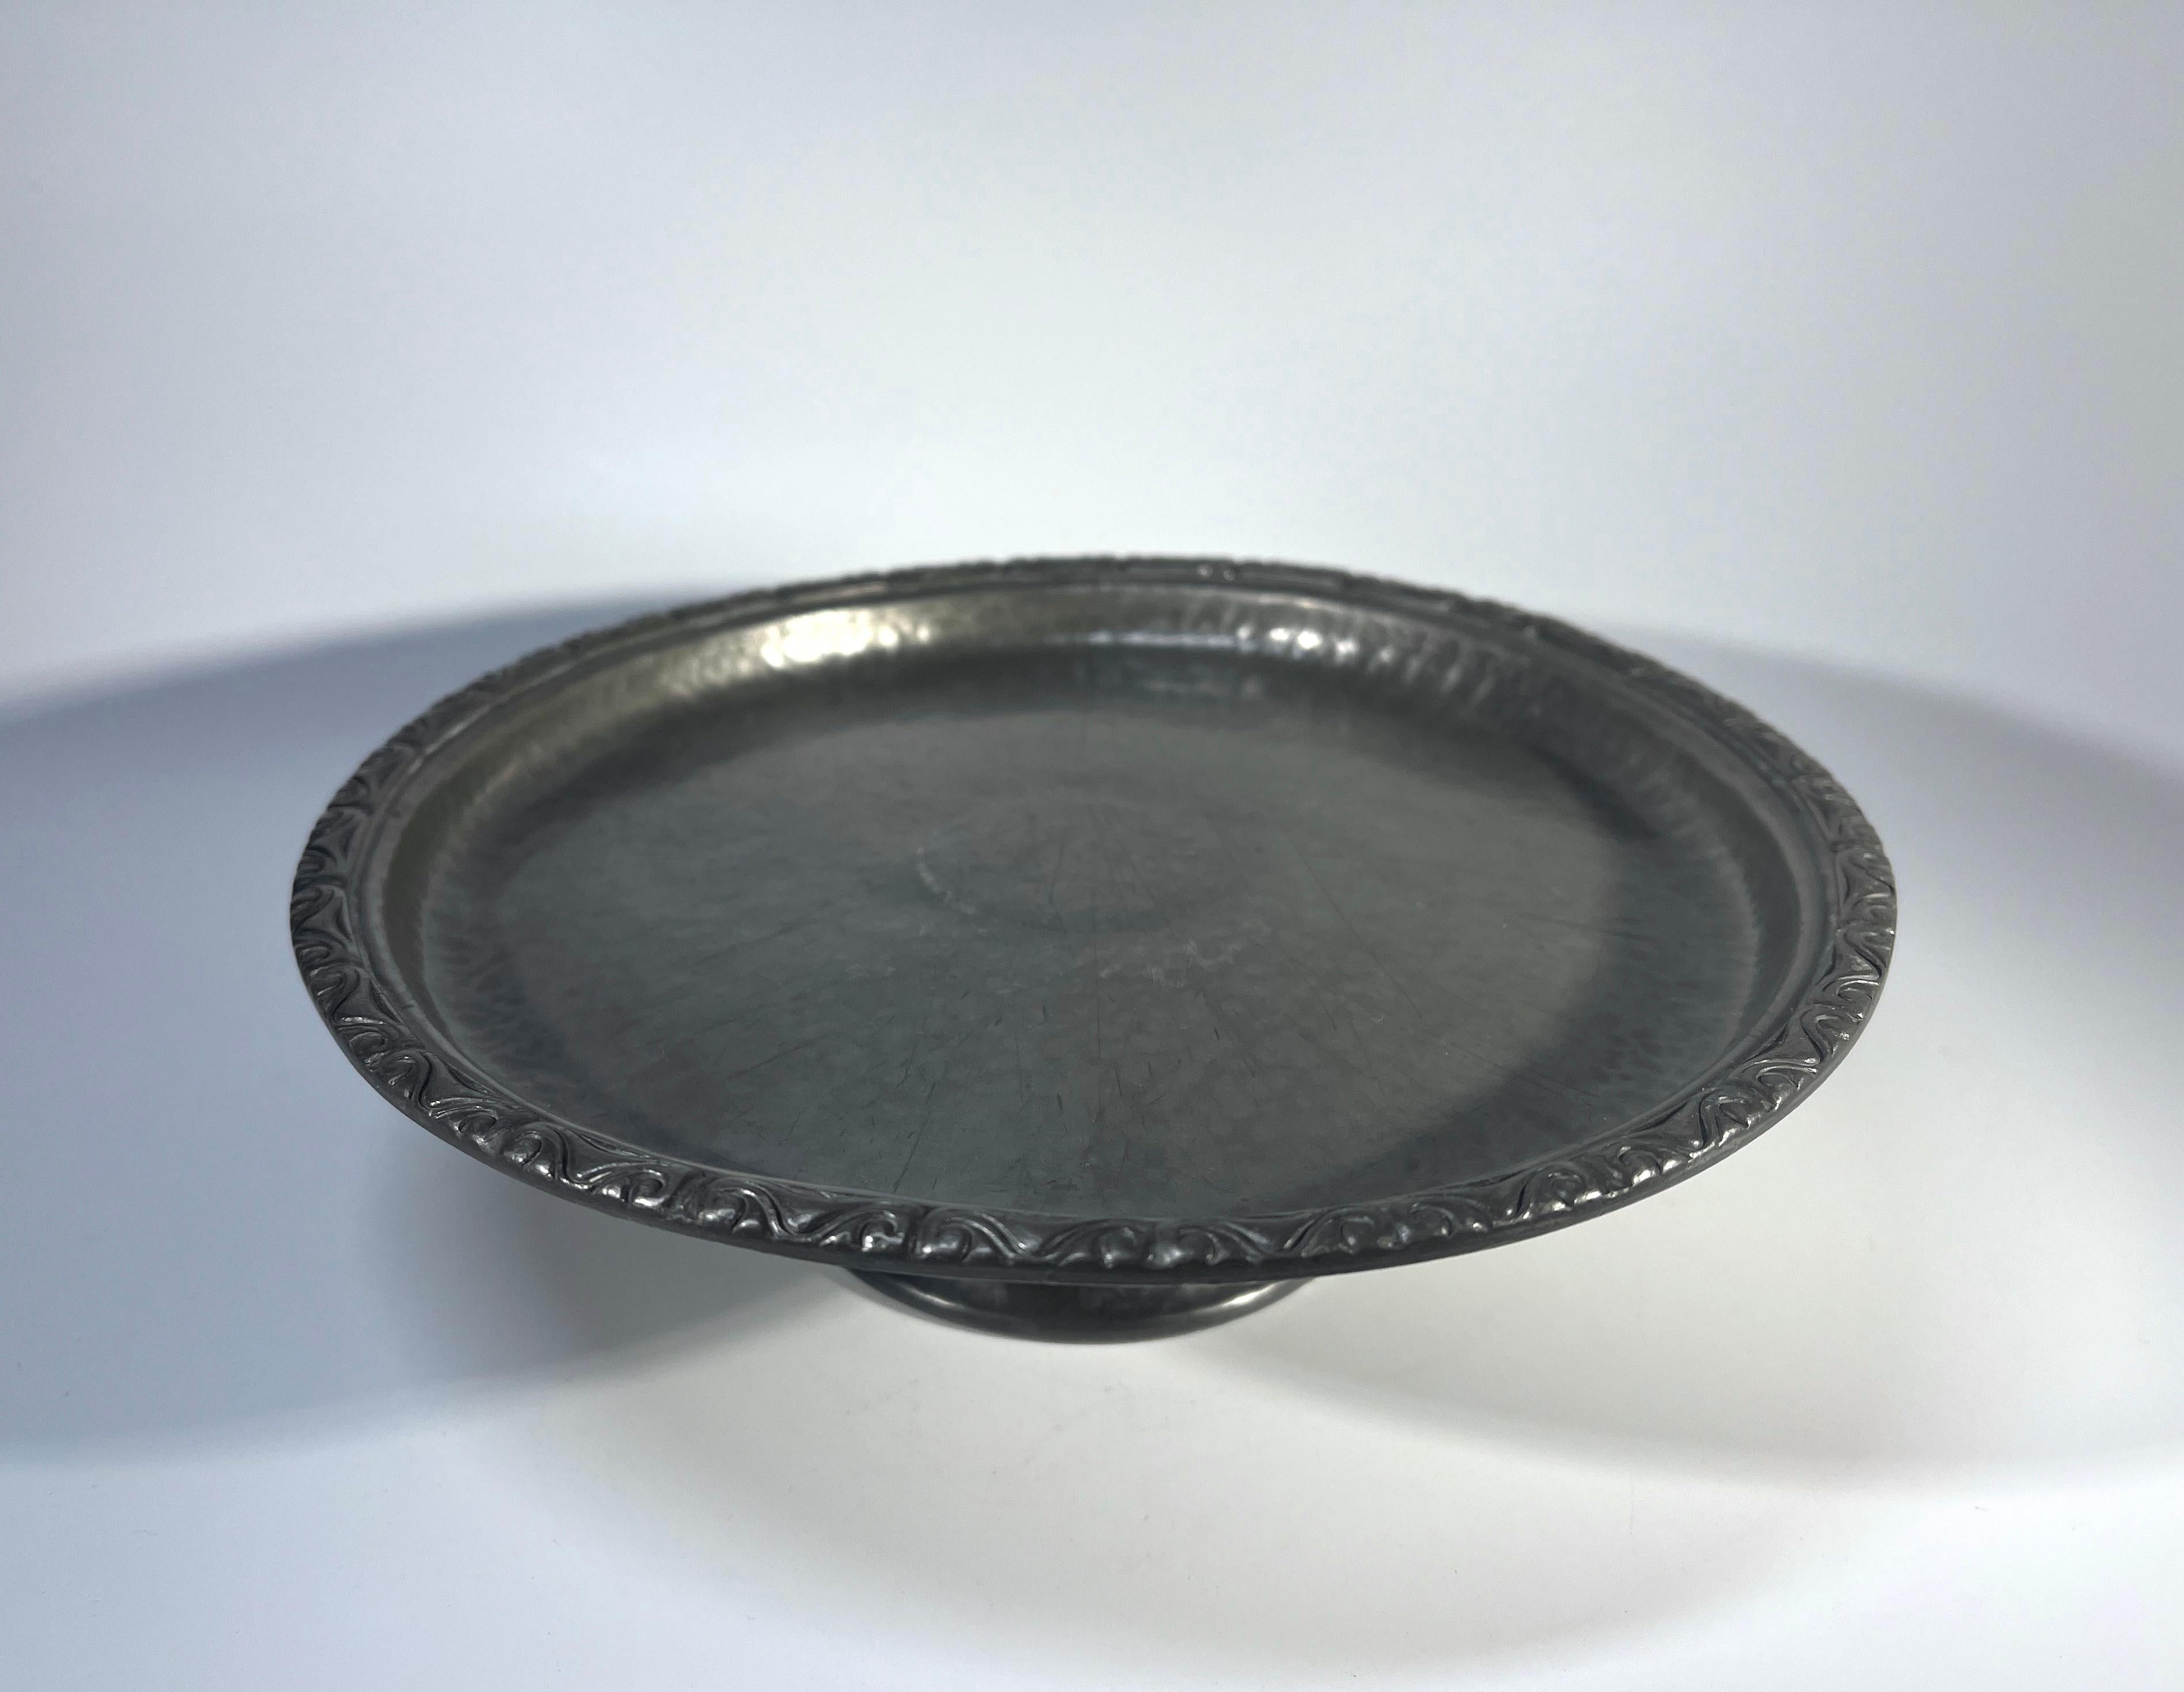 Art Nouveau Footed Tray Made By Liberty & Co., English Hammered Antique Pewter  For Sale 1